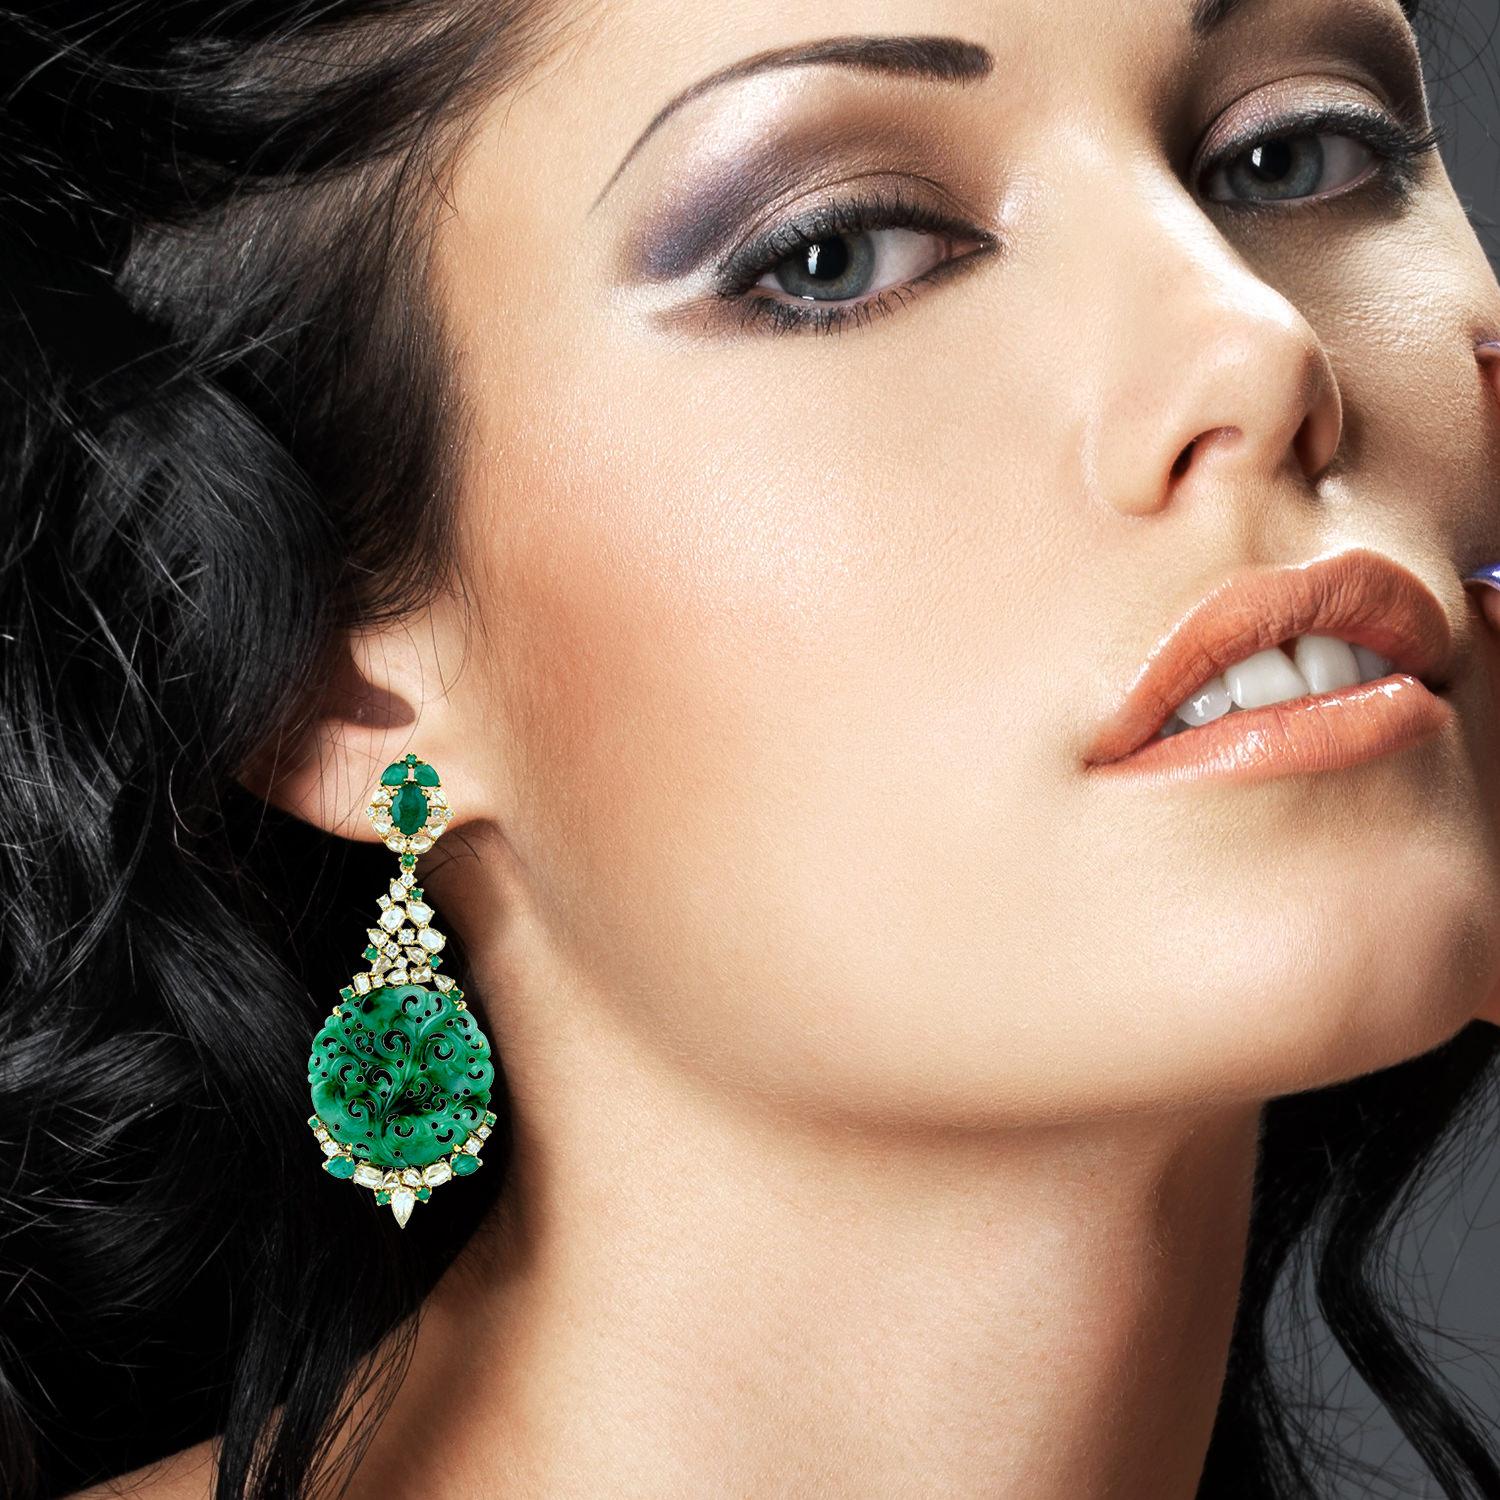 These stunning hand carved Jade earrings are crafted in 18-karat gold. It is set in 23.79 carats Jade, 3.27 carats emerald and 3.03 carats of sparkling diamonds.

FOLLOW  MEGHNA JEWELS storefront to view the latest collection & exclusive pieces. 